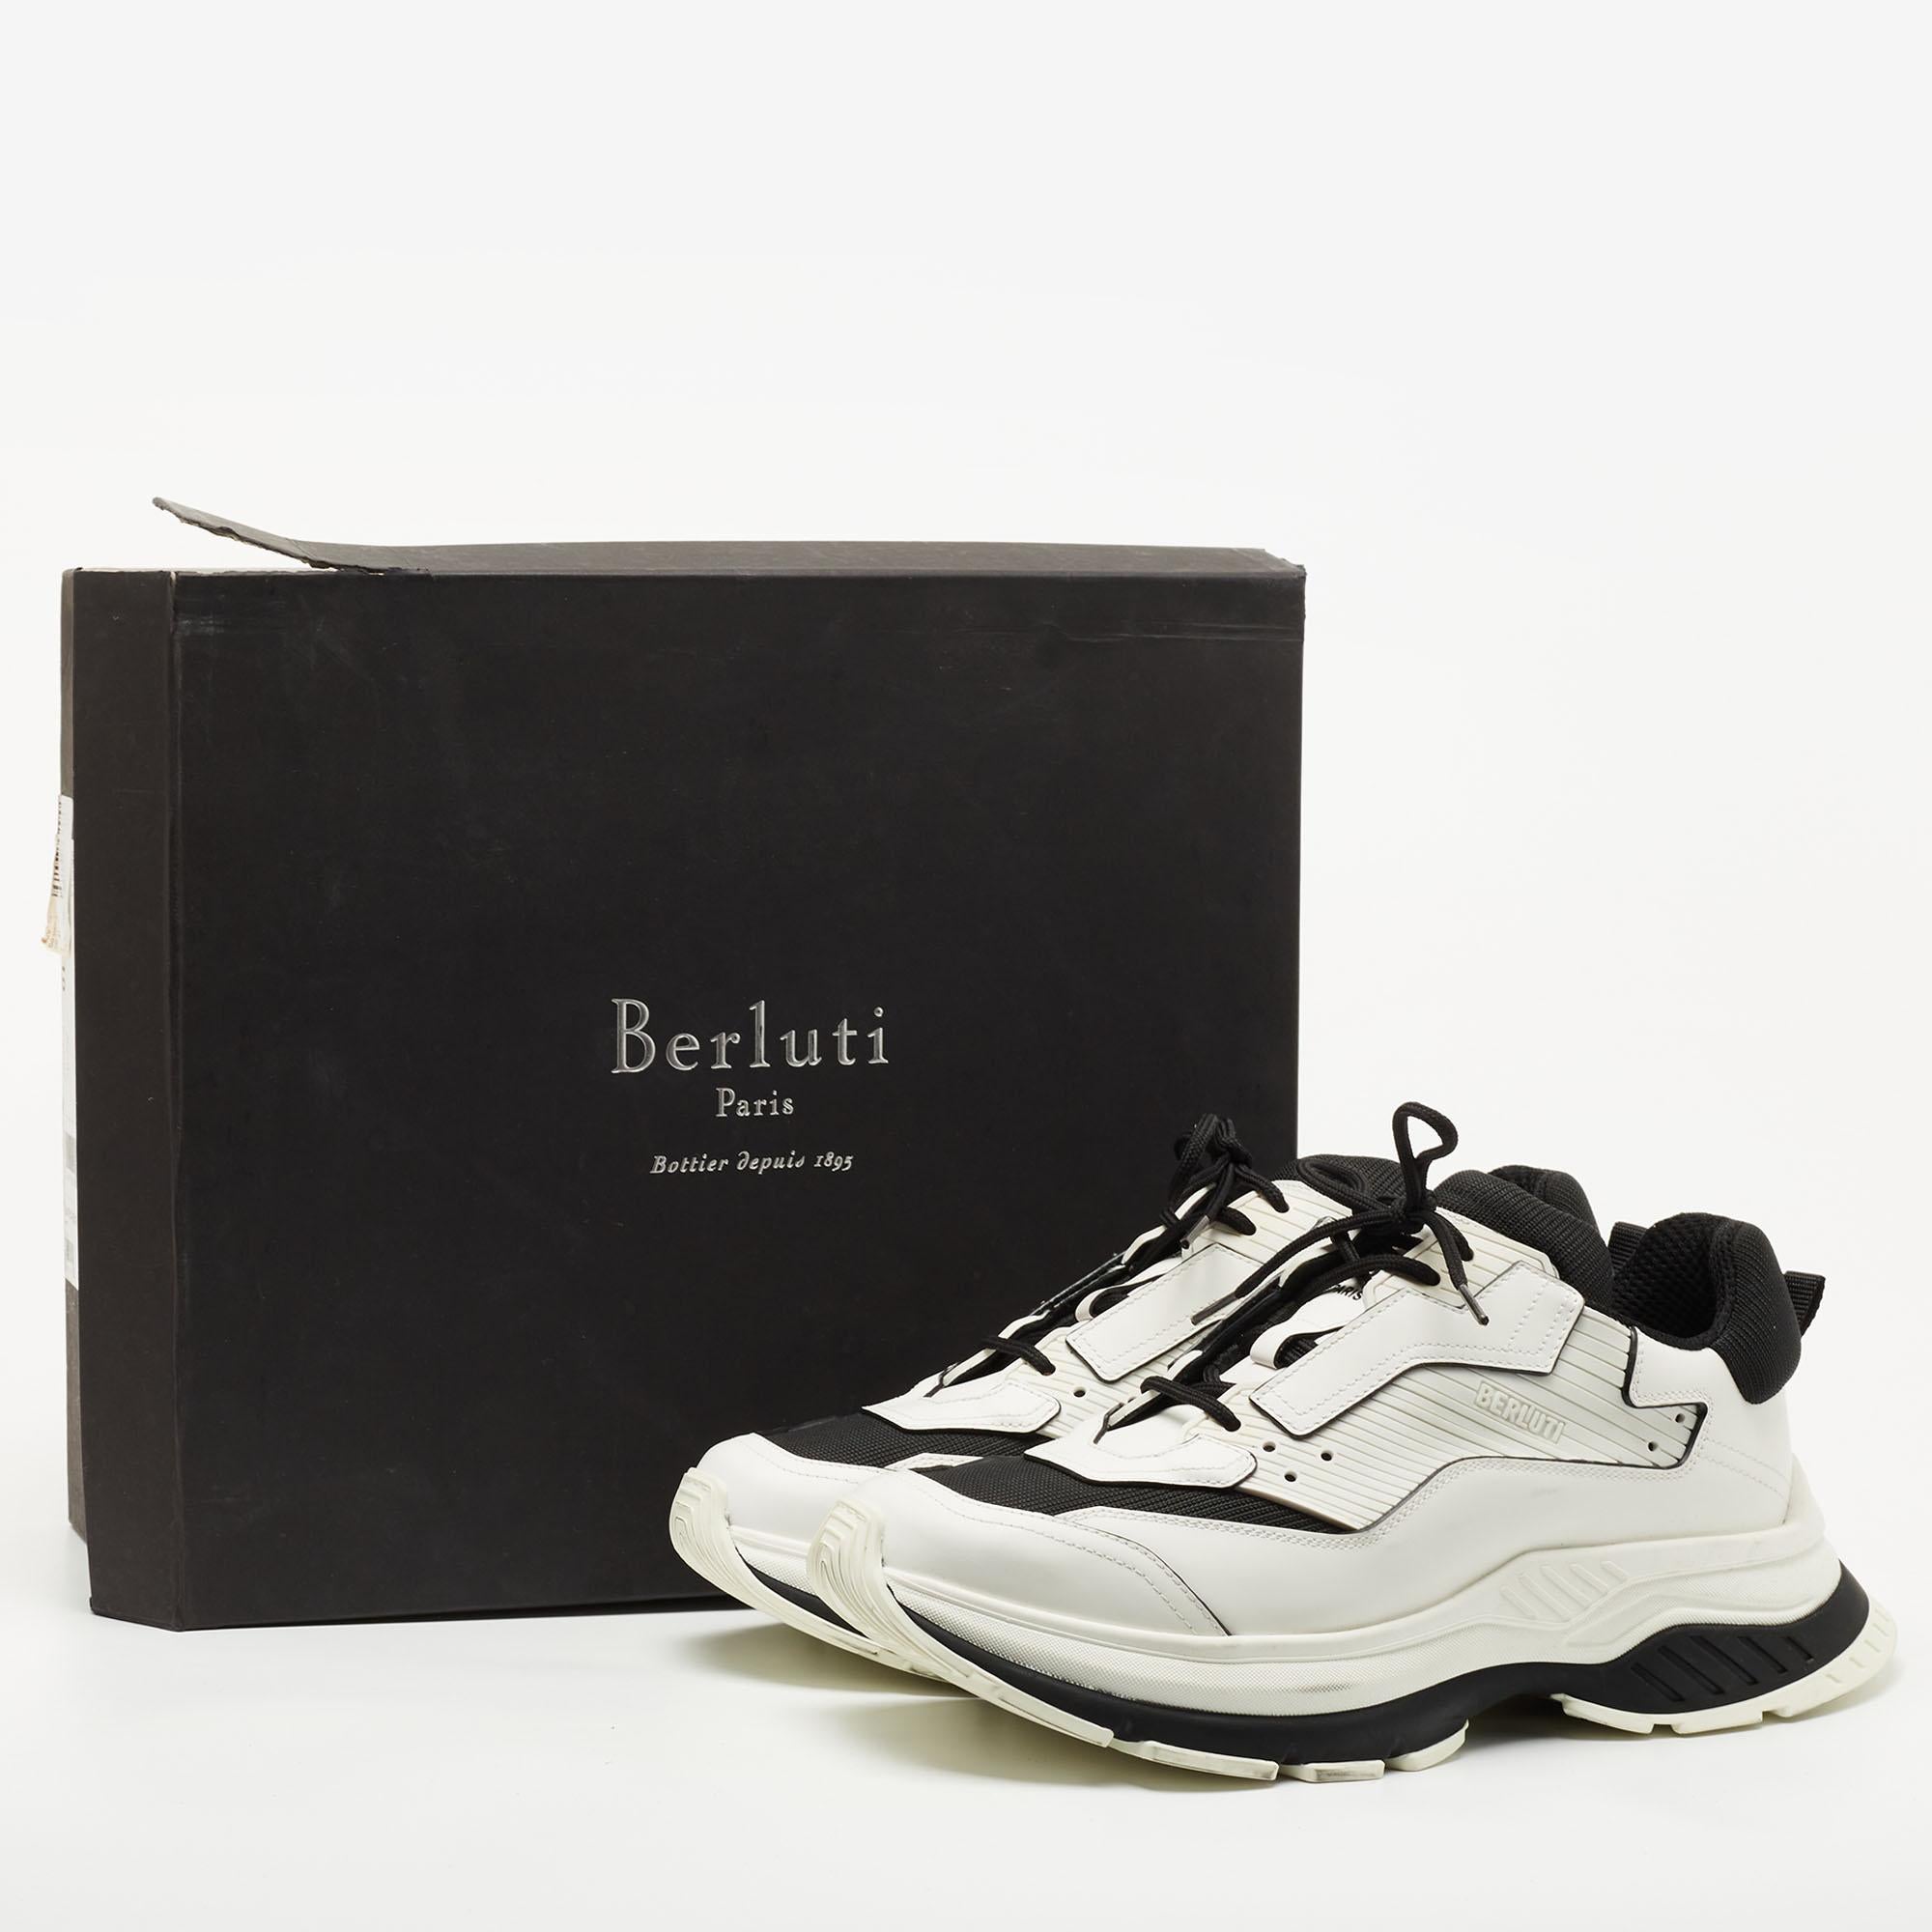 Berluti White/Black Leather Gravity Low Top Sneakers Size 44 5